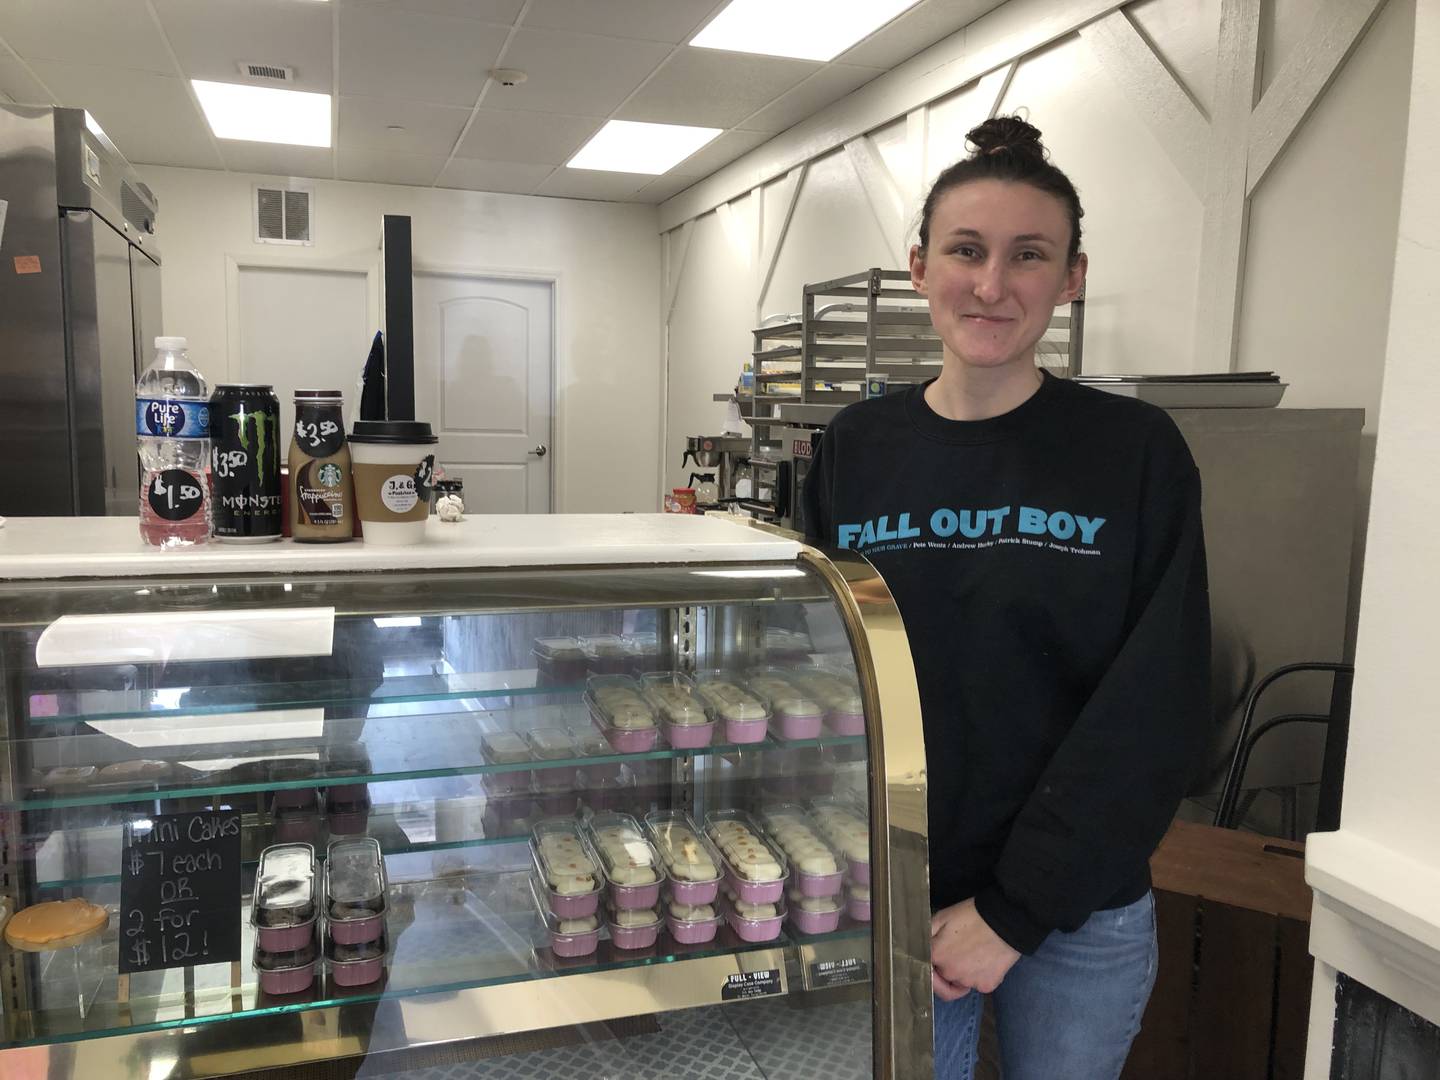 Jessica Cook, owner of J & G Pastries in Woodstock, poses with some freshly-made pastries